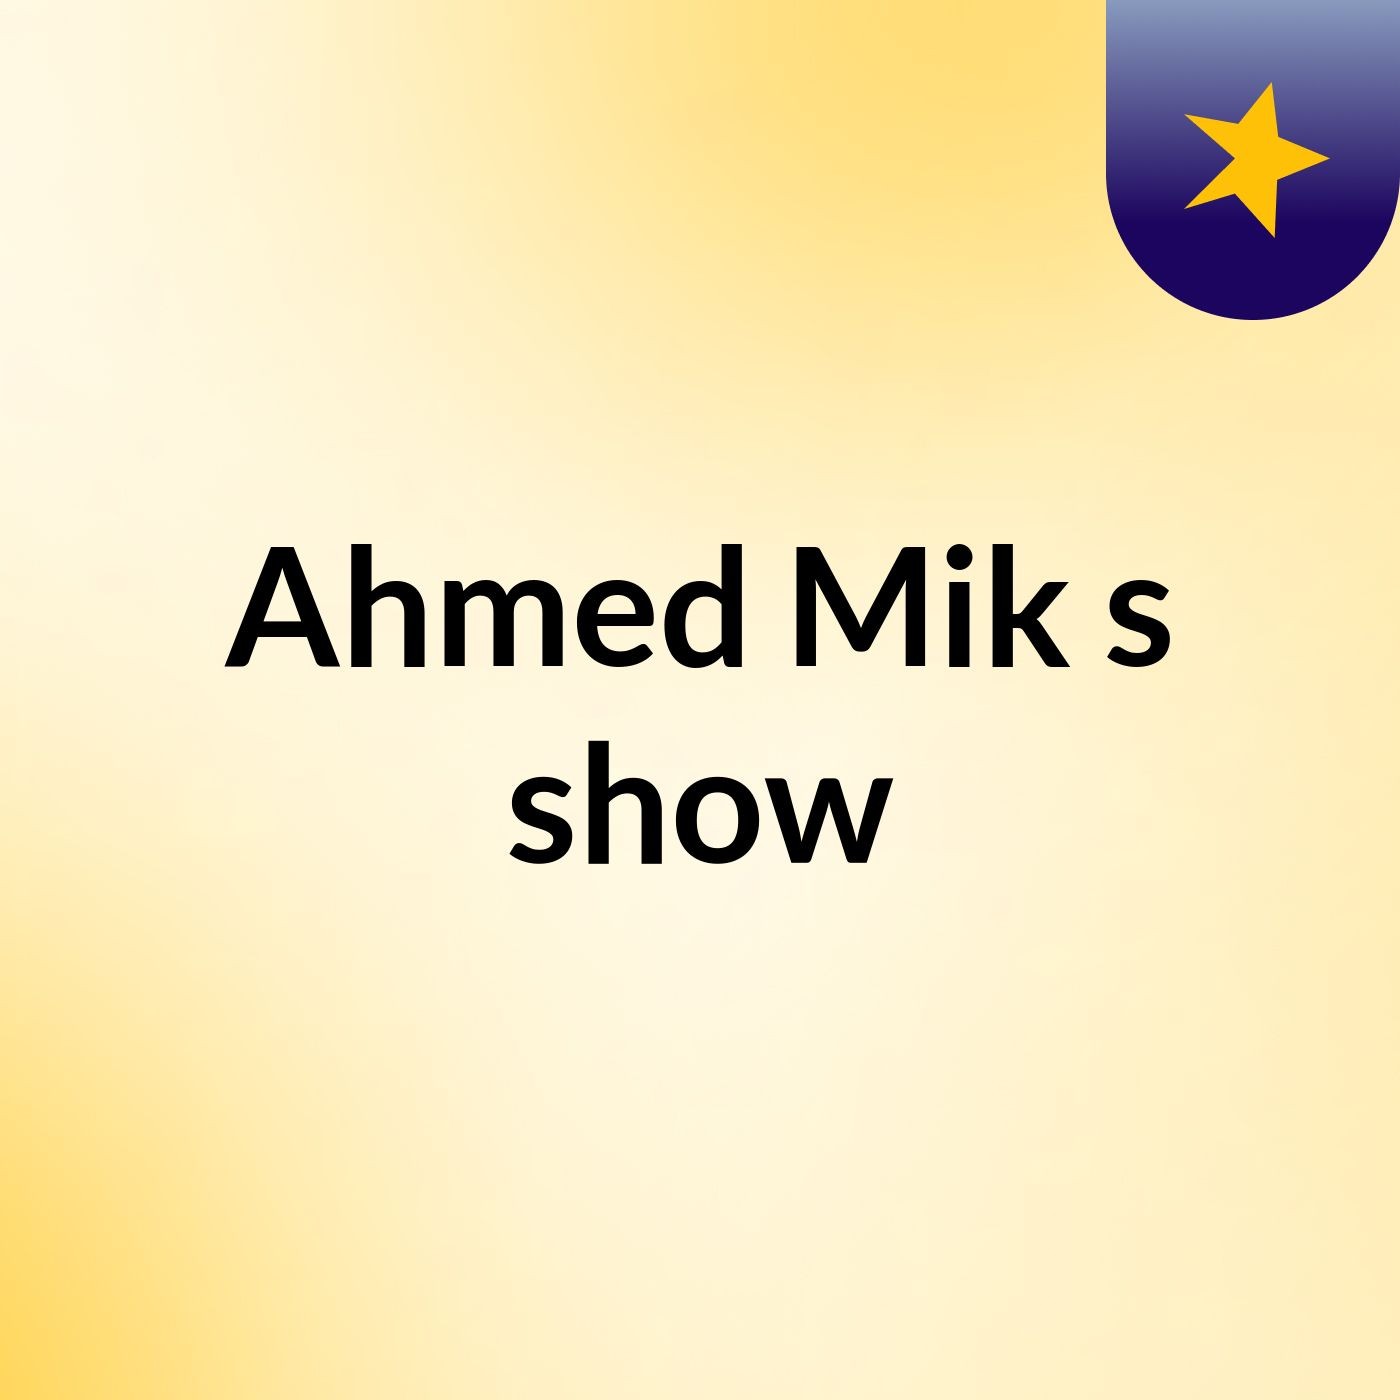 Ahmed Mik's show